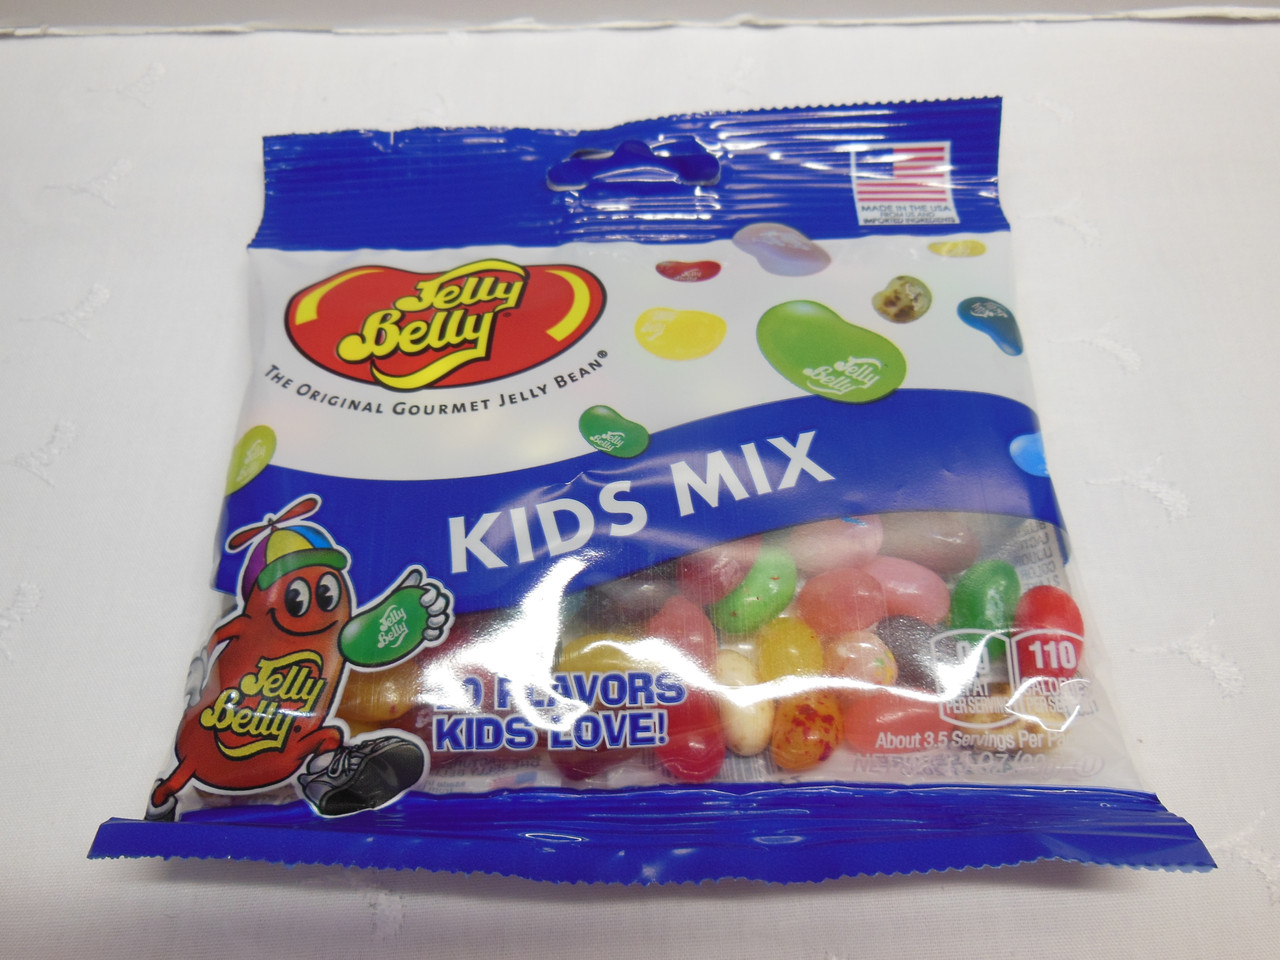 Manufacturer's　Jelly　Mix　Kids　9.5oz　Bag　Belly　(99g)　Net　Jelly　Beans　Wt.